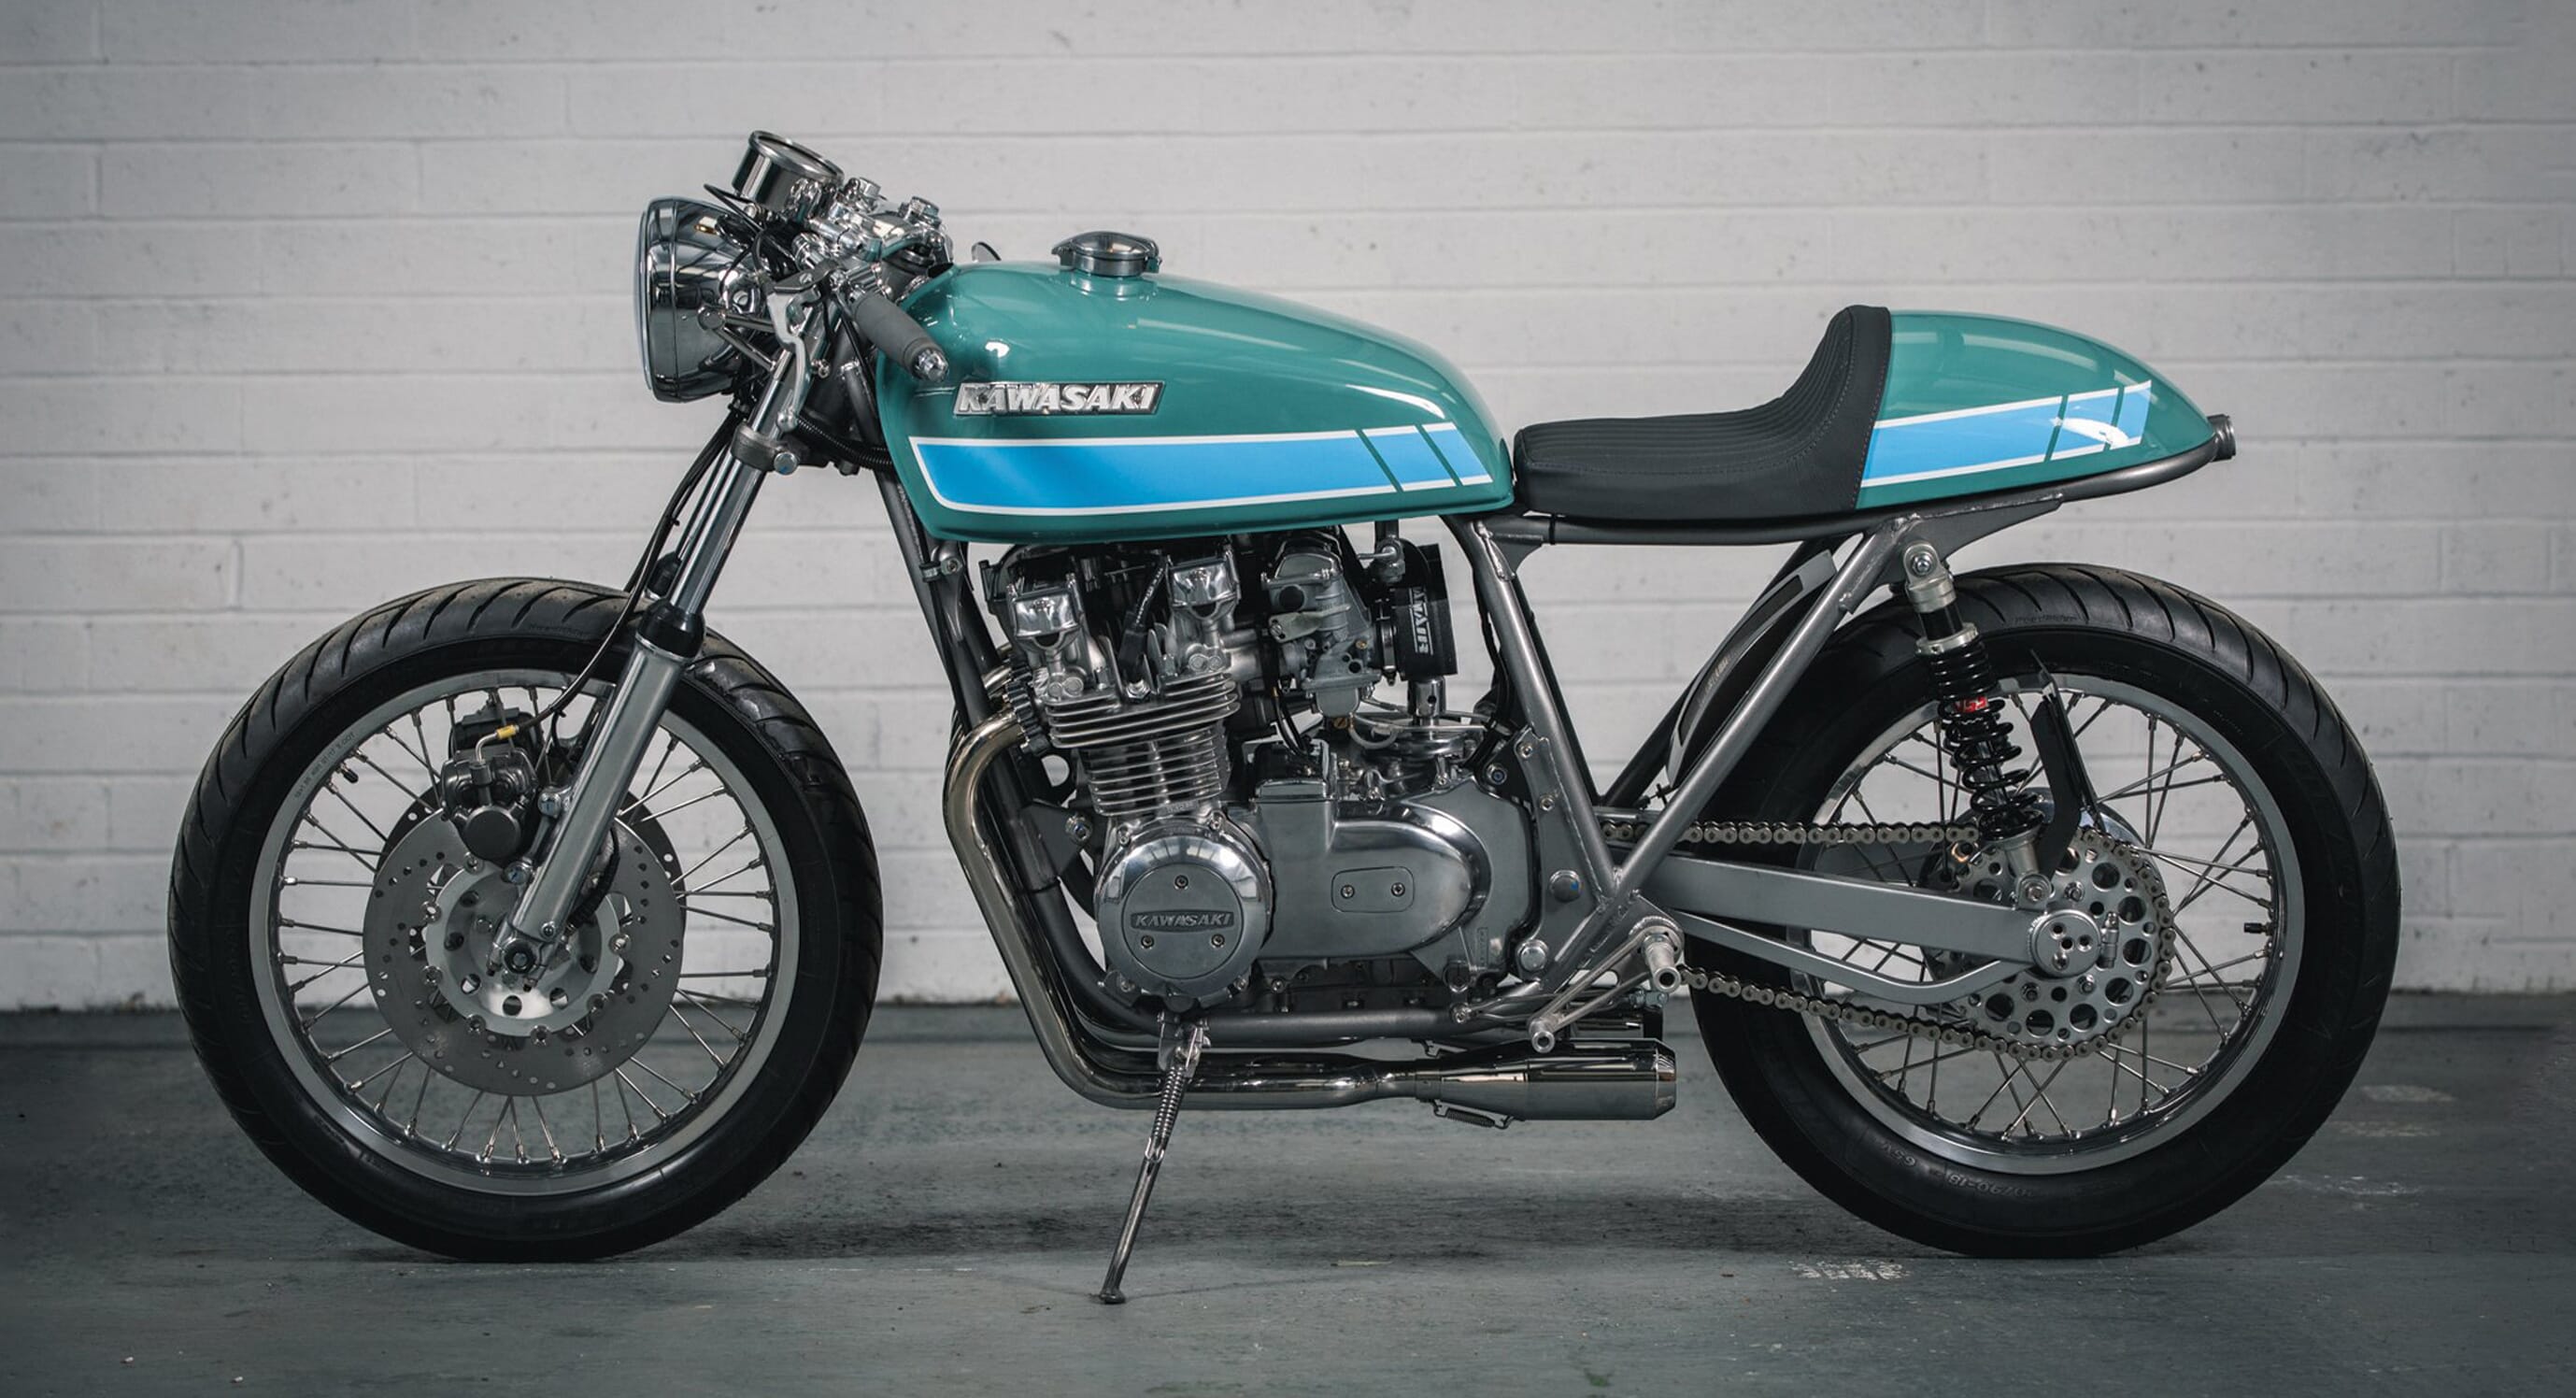 This Kawasaki KZ750 Is The Cleanest Cafe Racer Yet